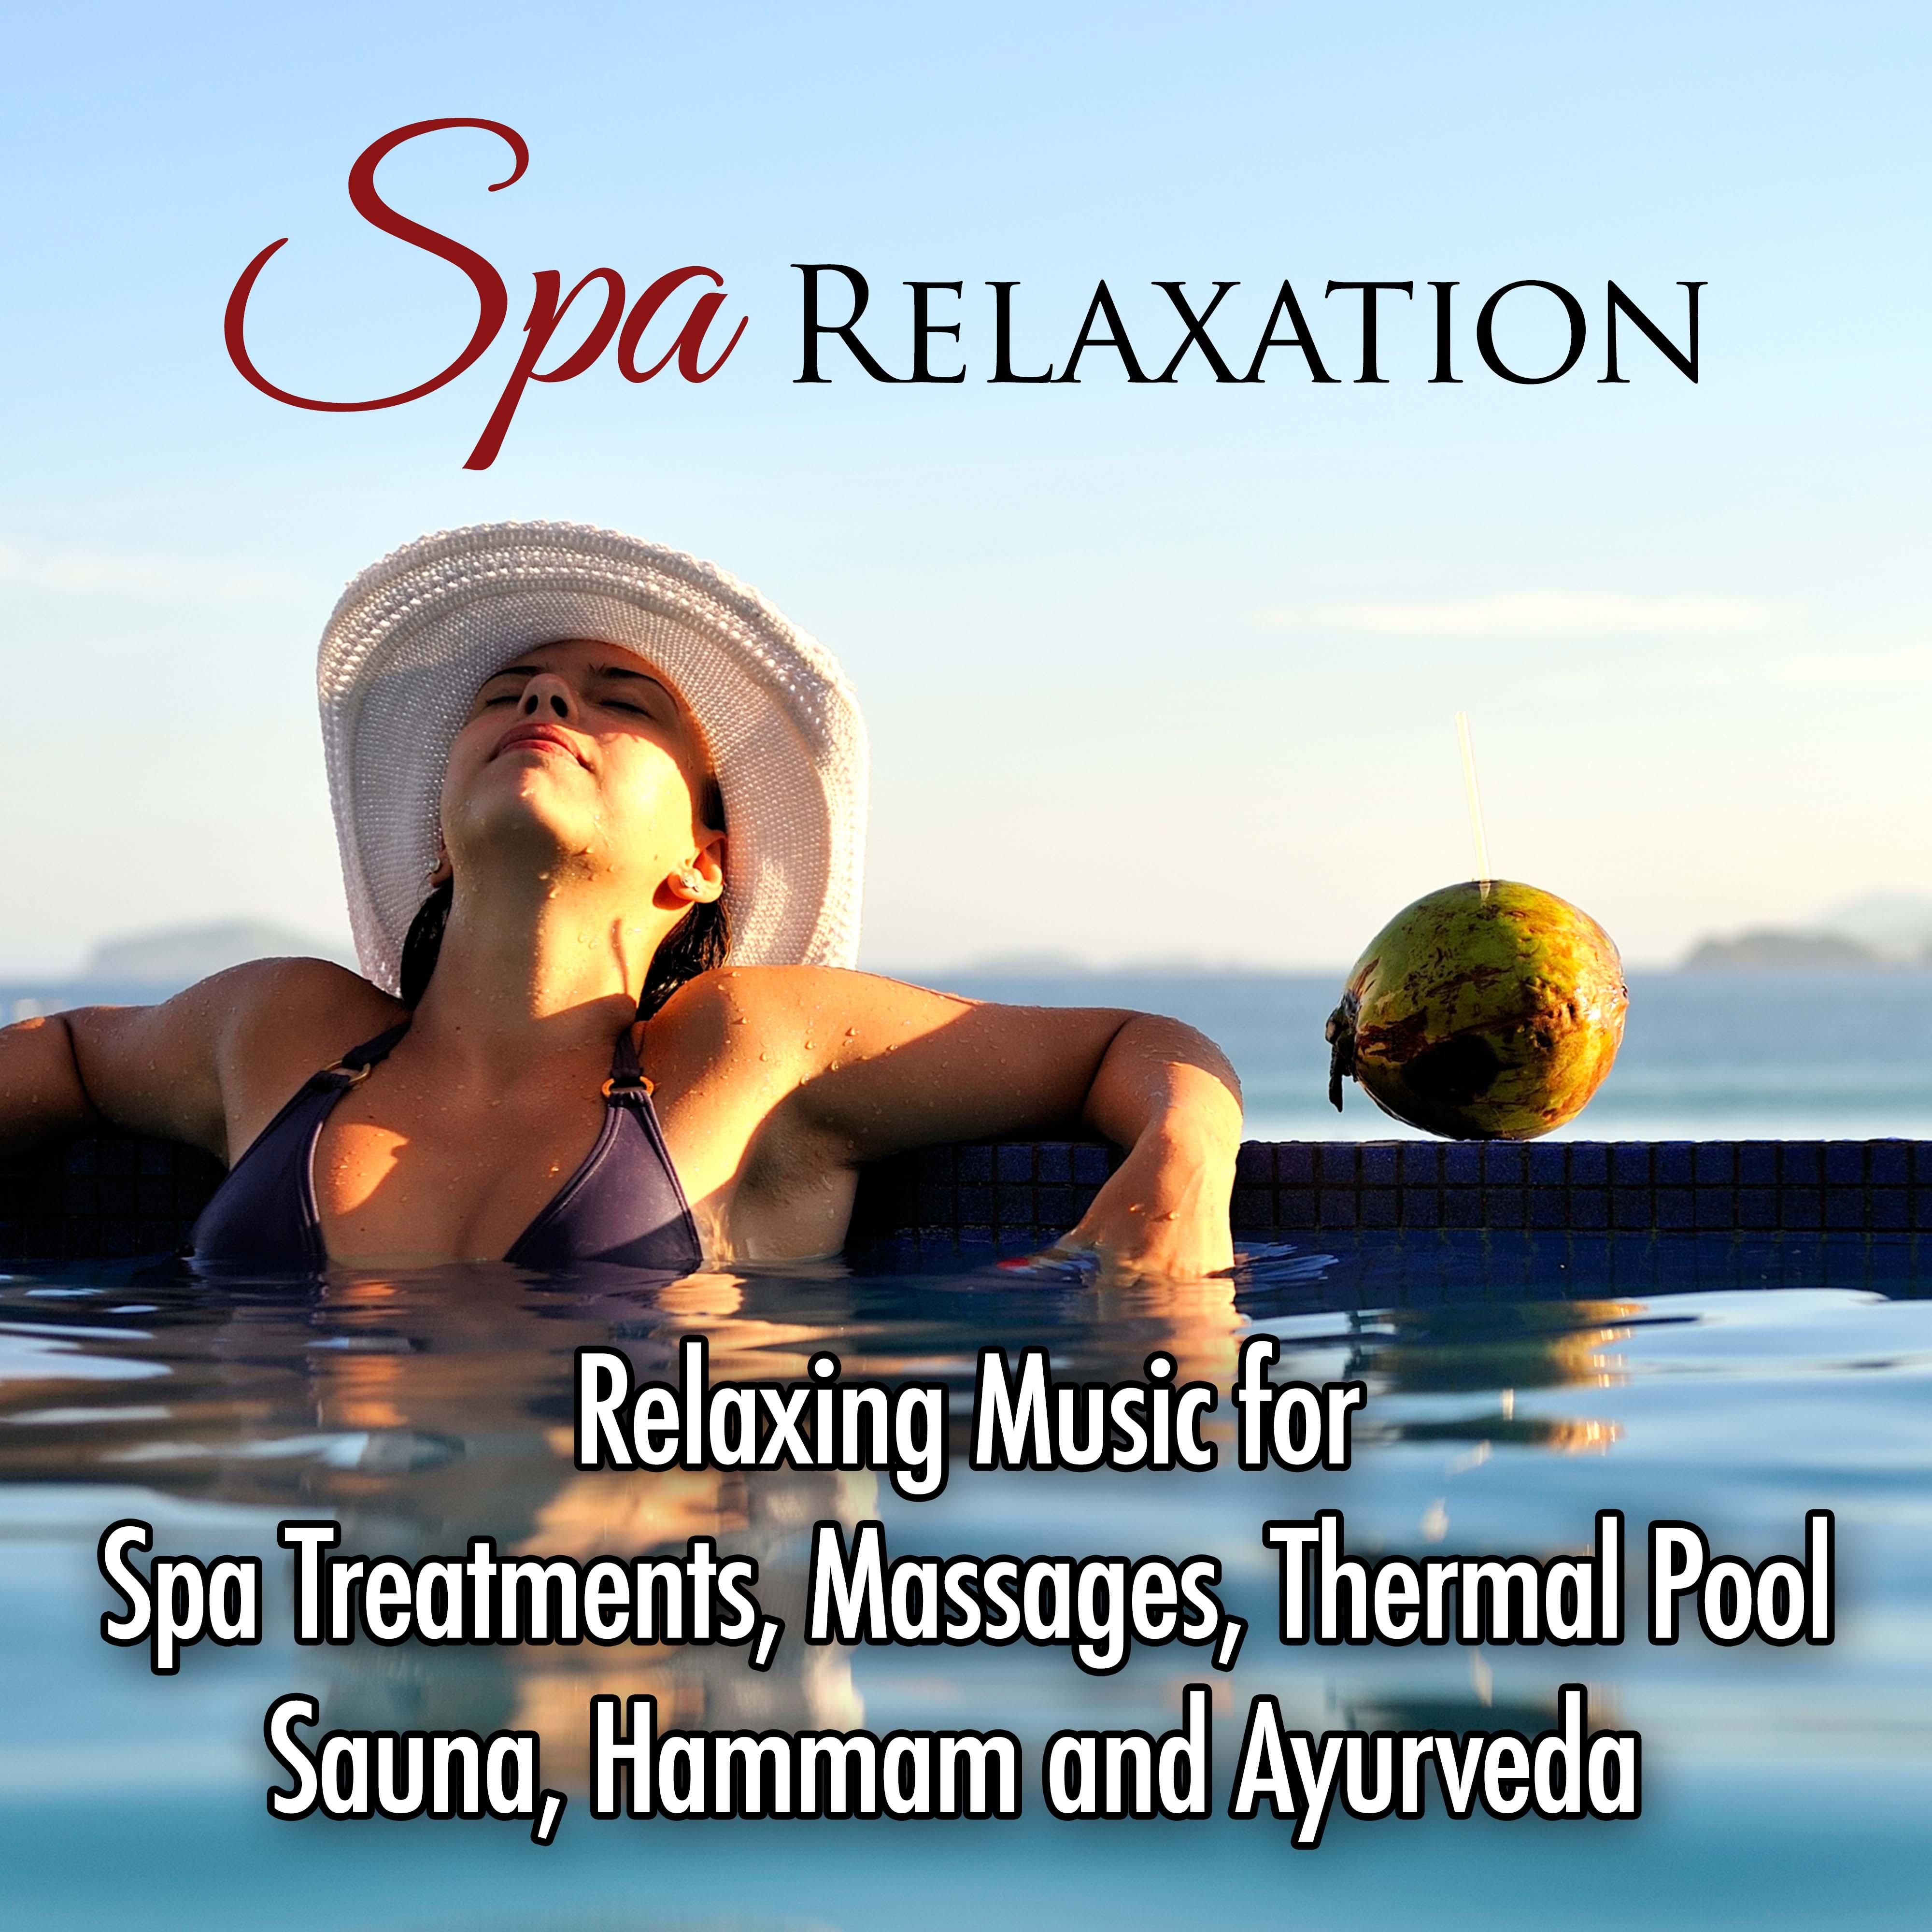 Spa Relaxation: Relaxing Music for Spa Treatments, Massages, Thermal Pool, Sauna, Hammam and Ayurveda